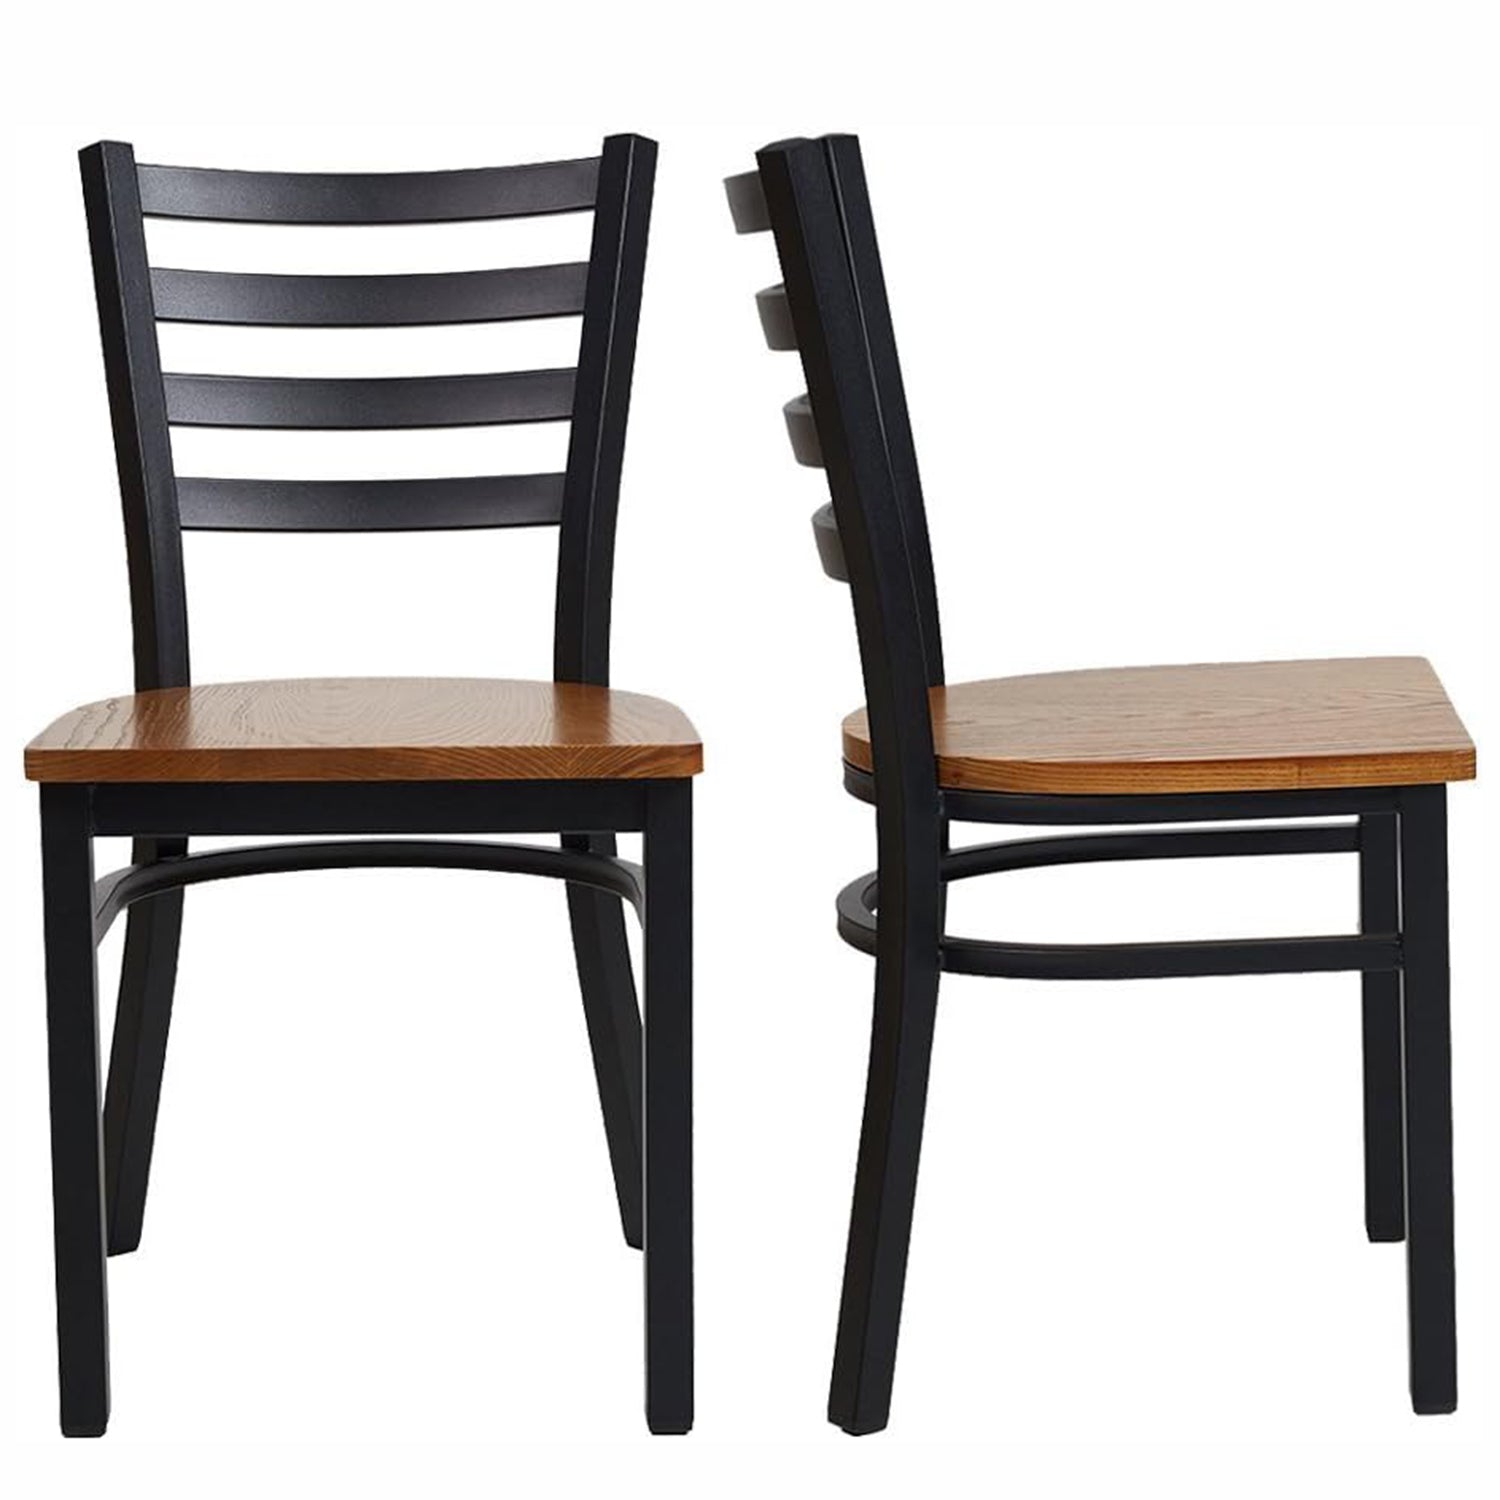 Set of 2 Kitchen Dining Chairs Wood Seat with Metal Legs Fully Assembled, Ladder Back